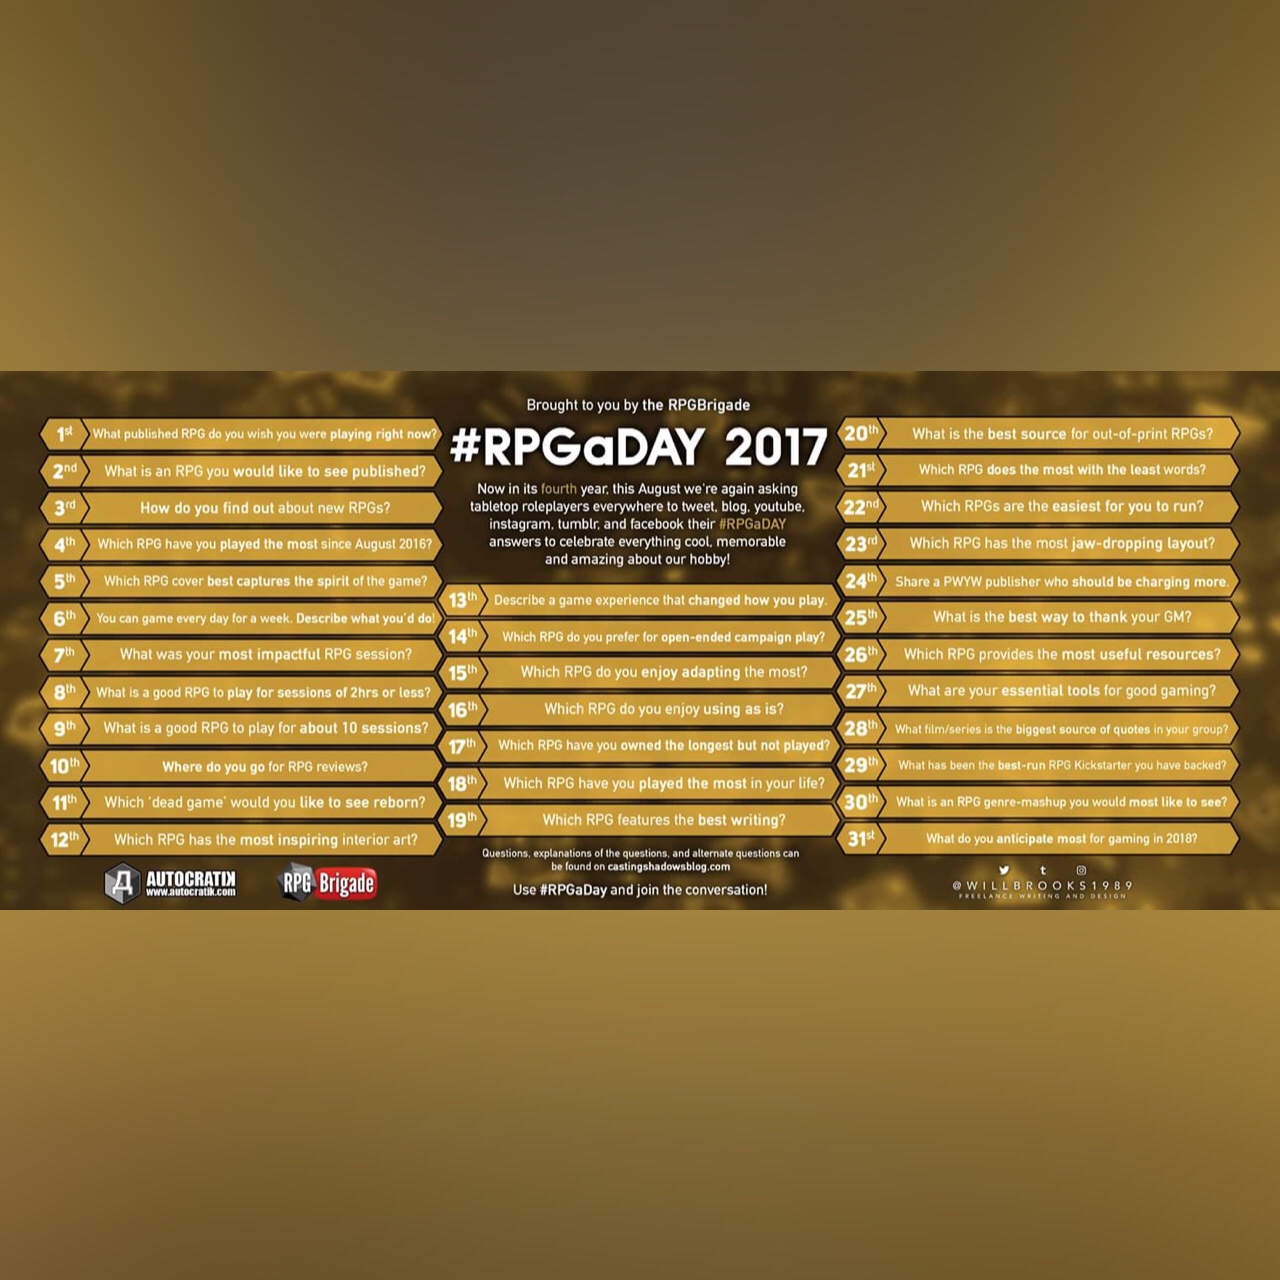 RPGaDAY 2017 August 29 What was the best-run RPG crowdfunding campaign you have backed?